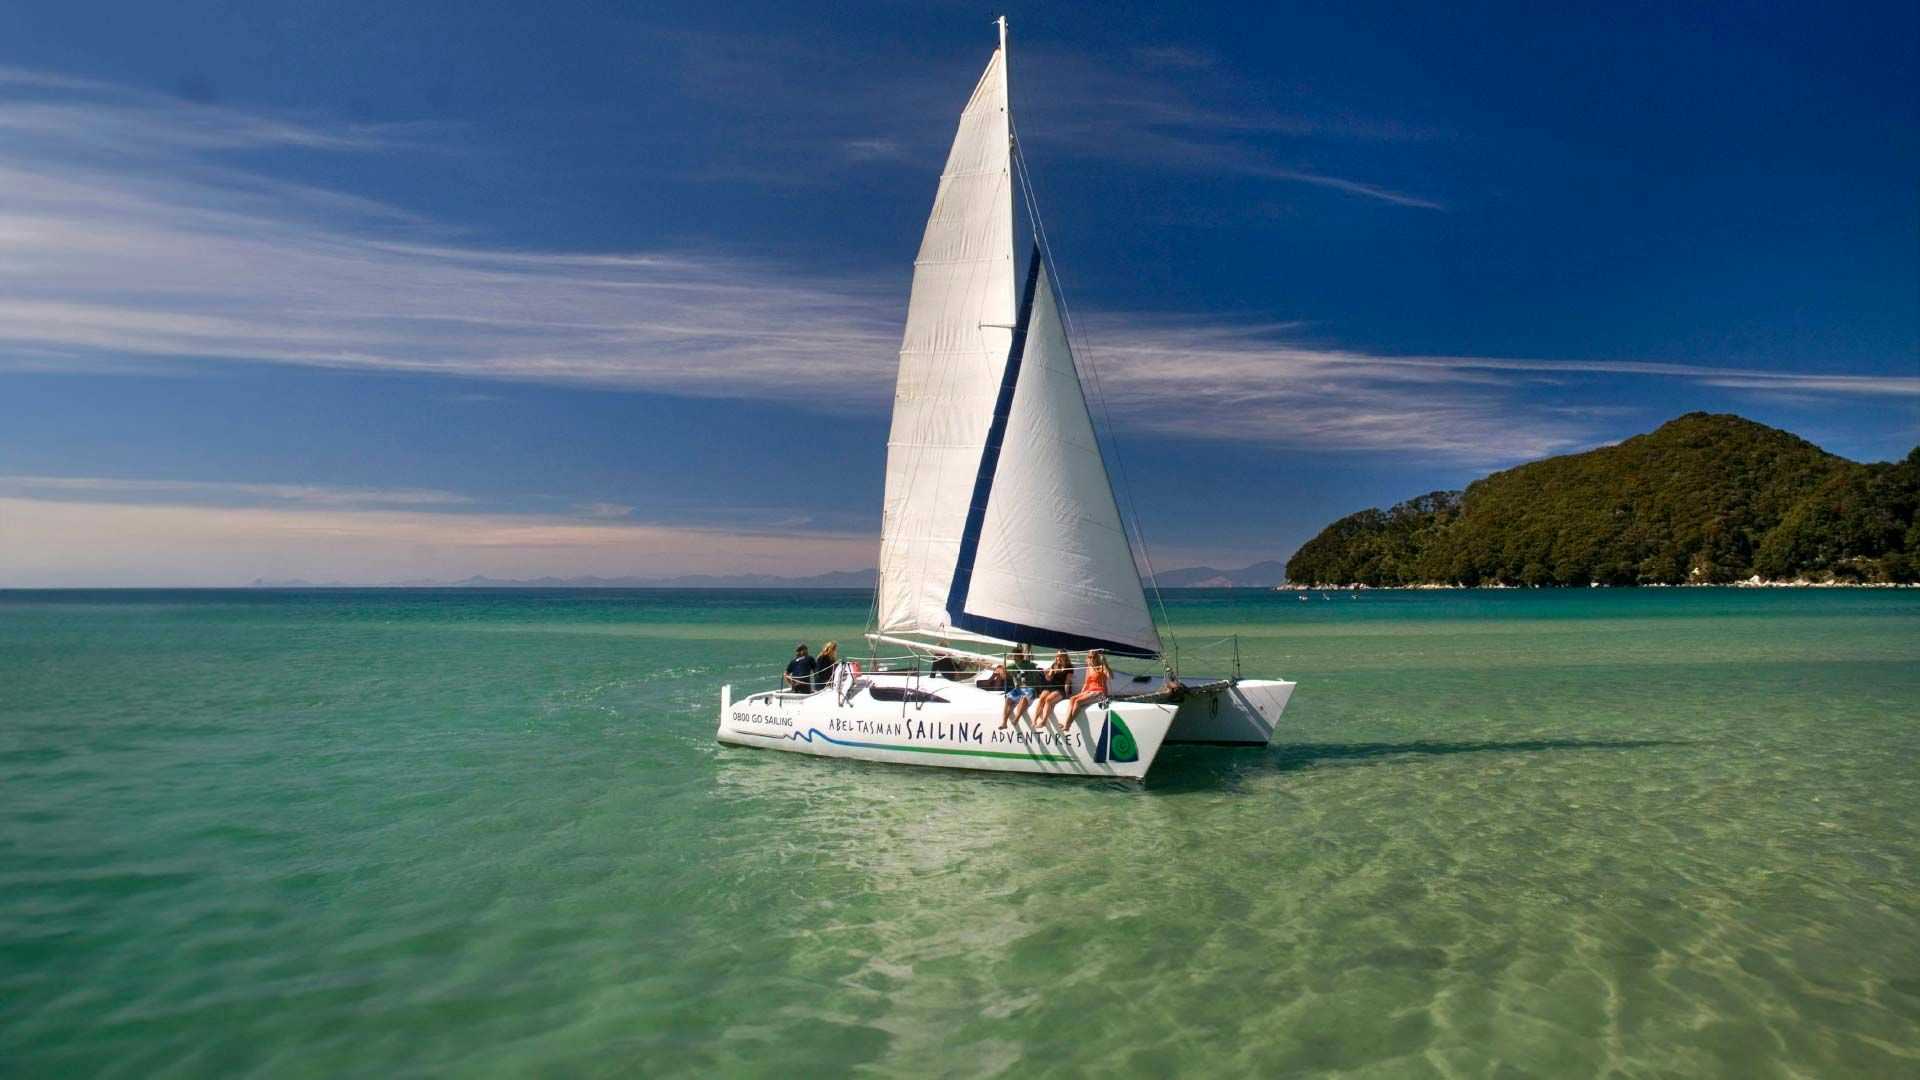 People on a yacht in Abel Tasman National Park